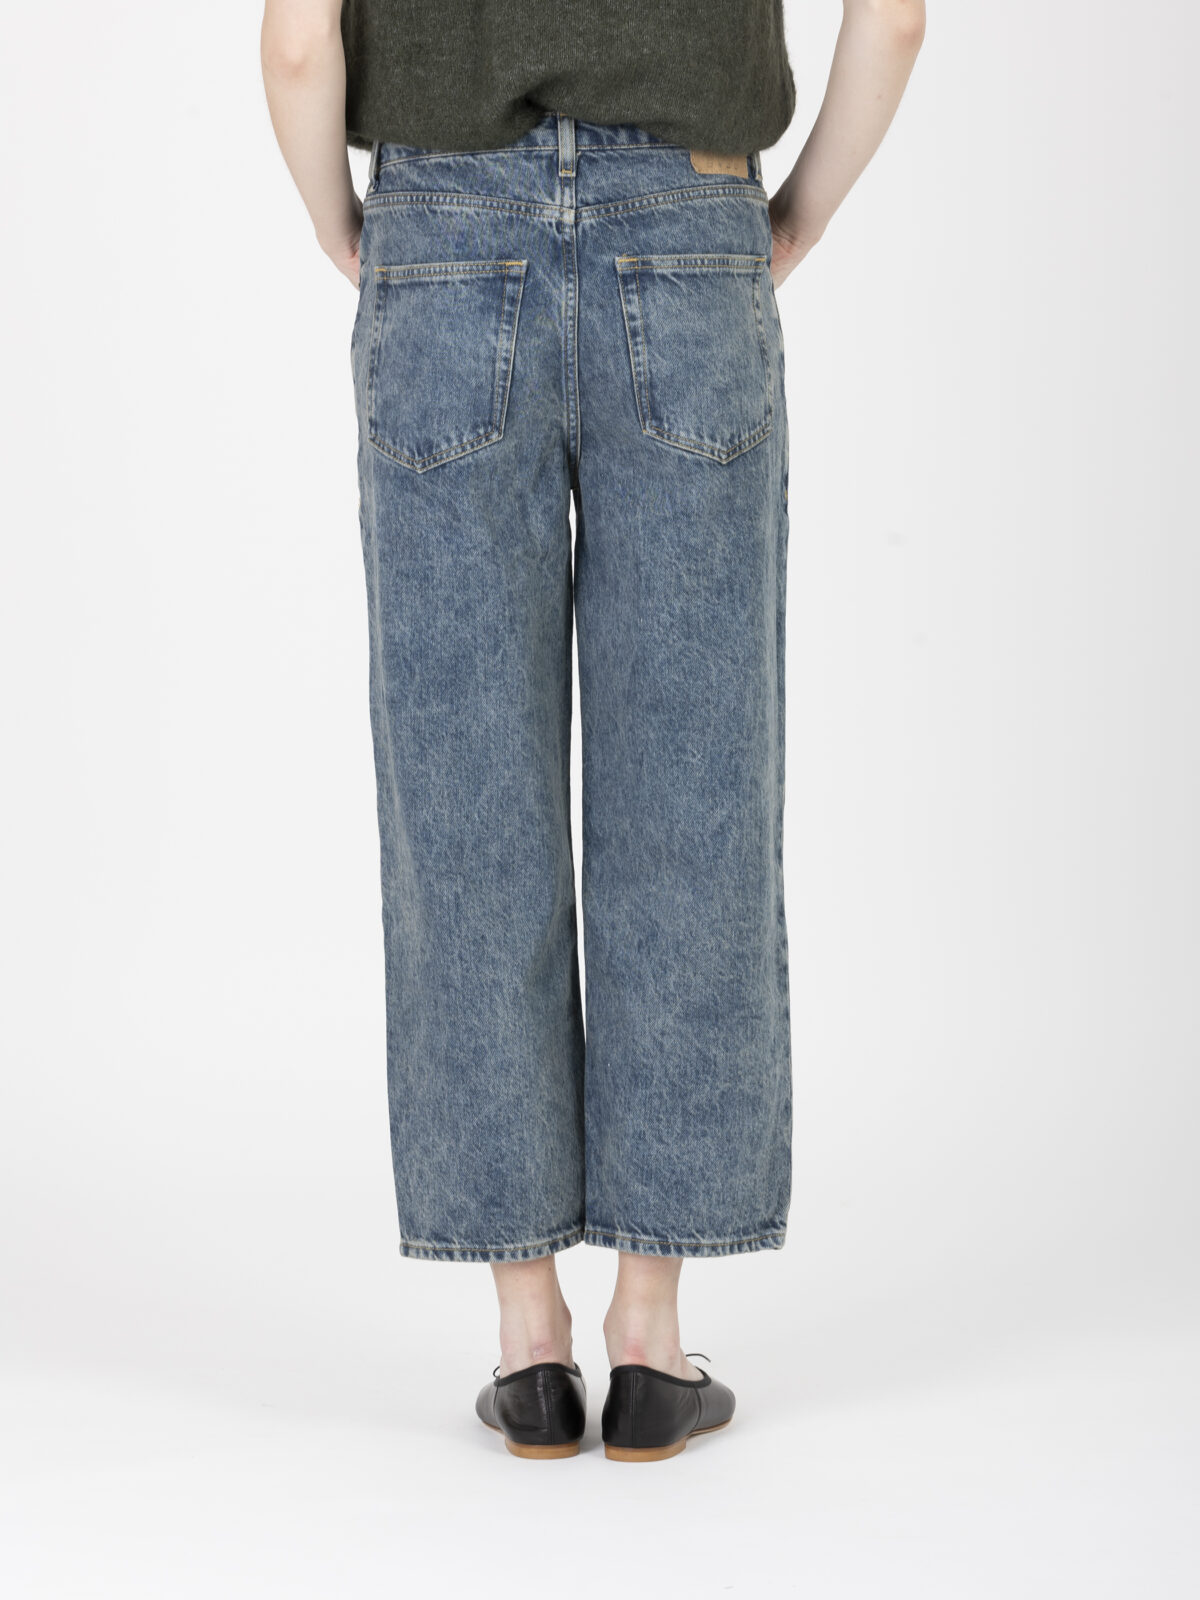 joybird-jeans-cropped-dirty-blue-staright-american-vintage-matchboxathens